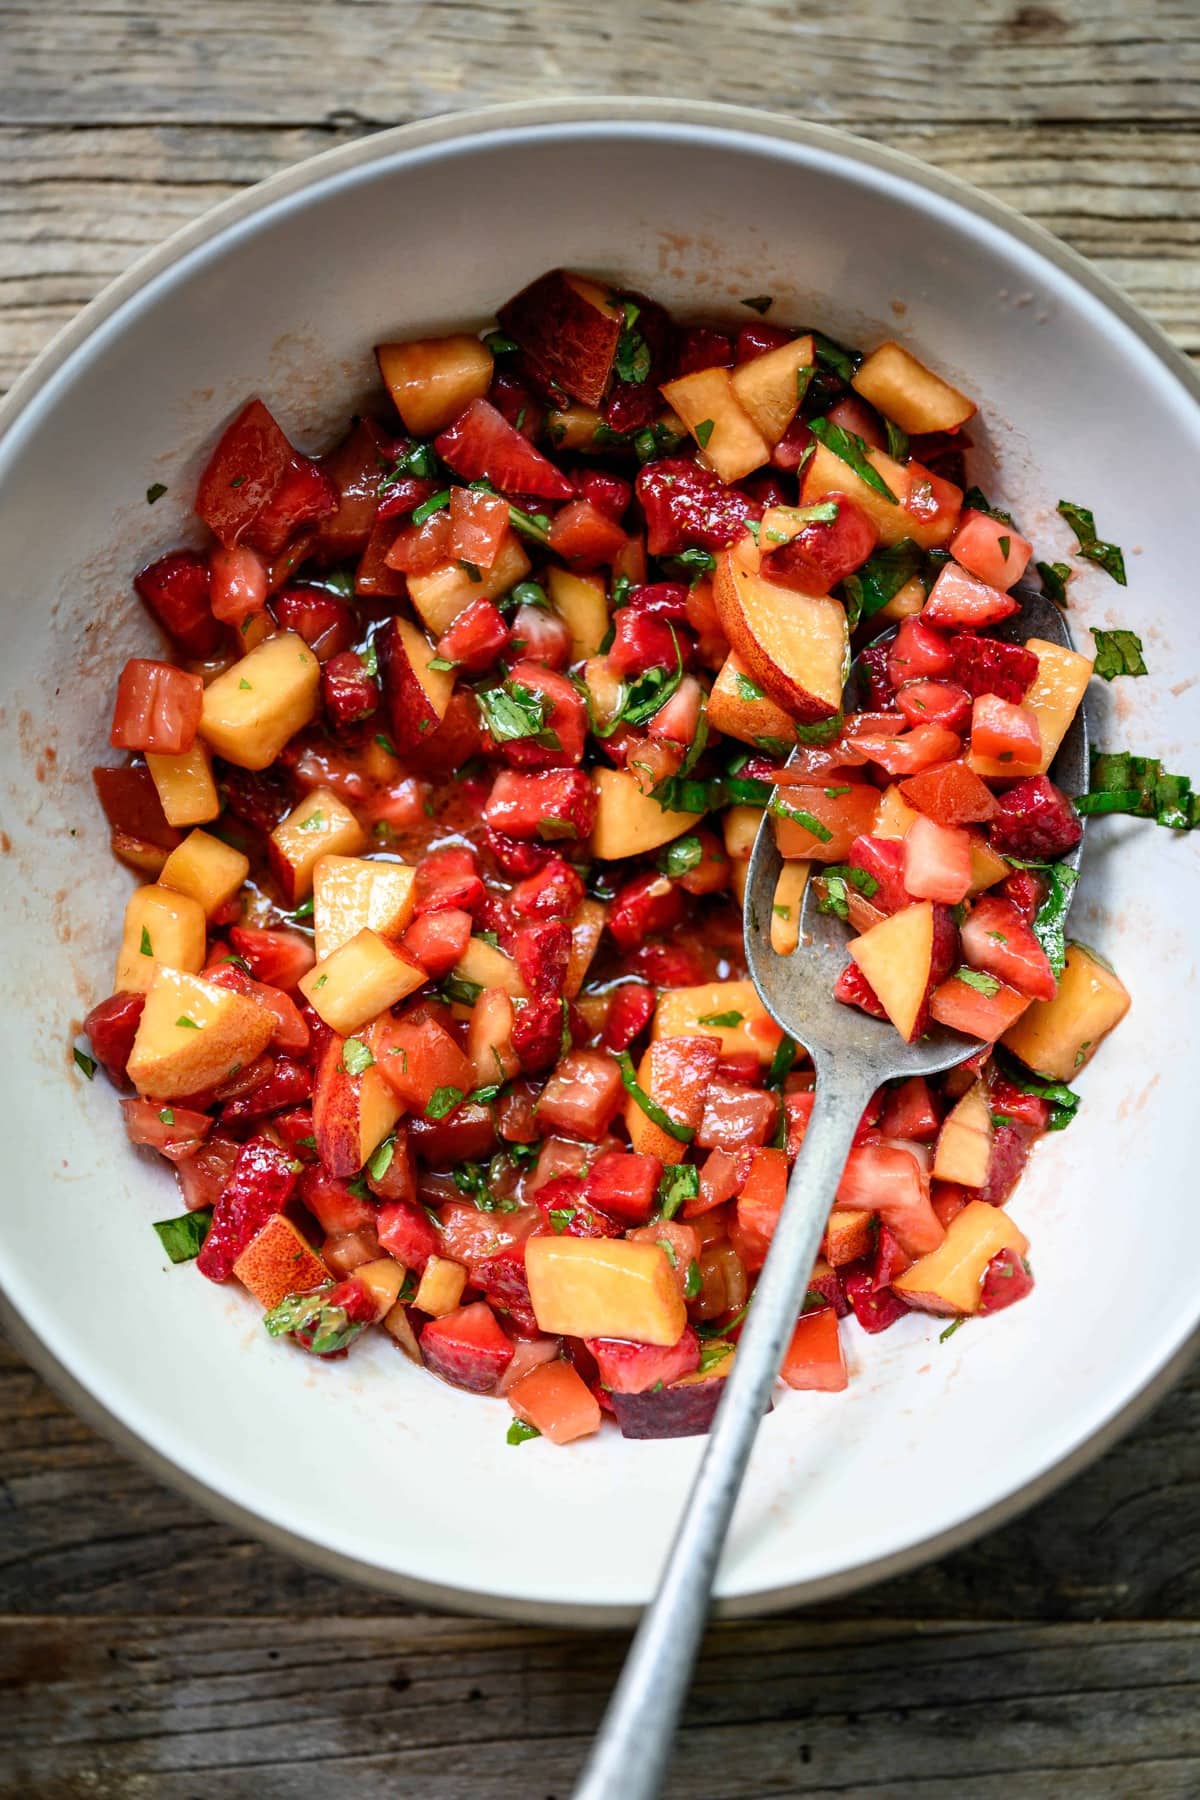 Overhead view of diced peaches, strawberries and tomatoes in a white bowl